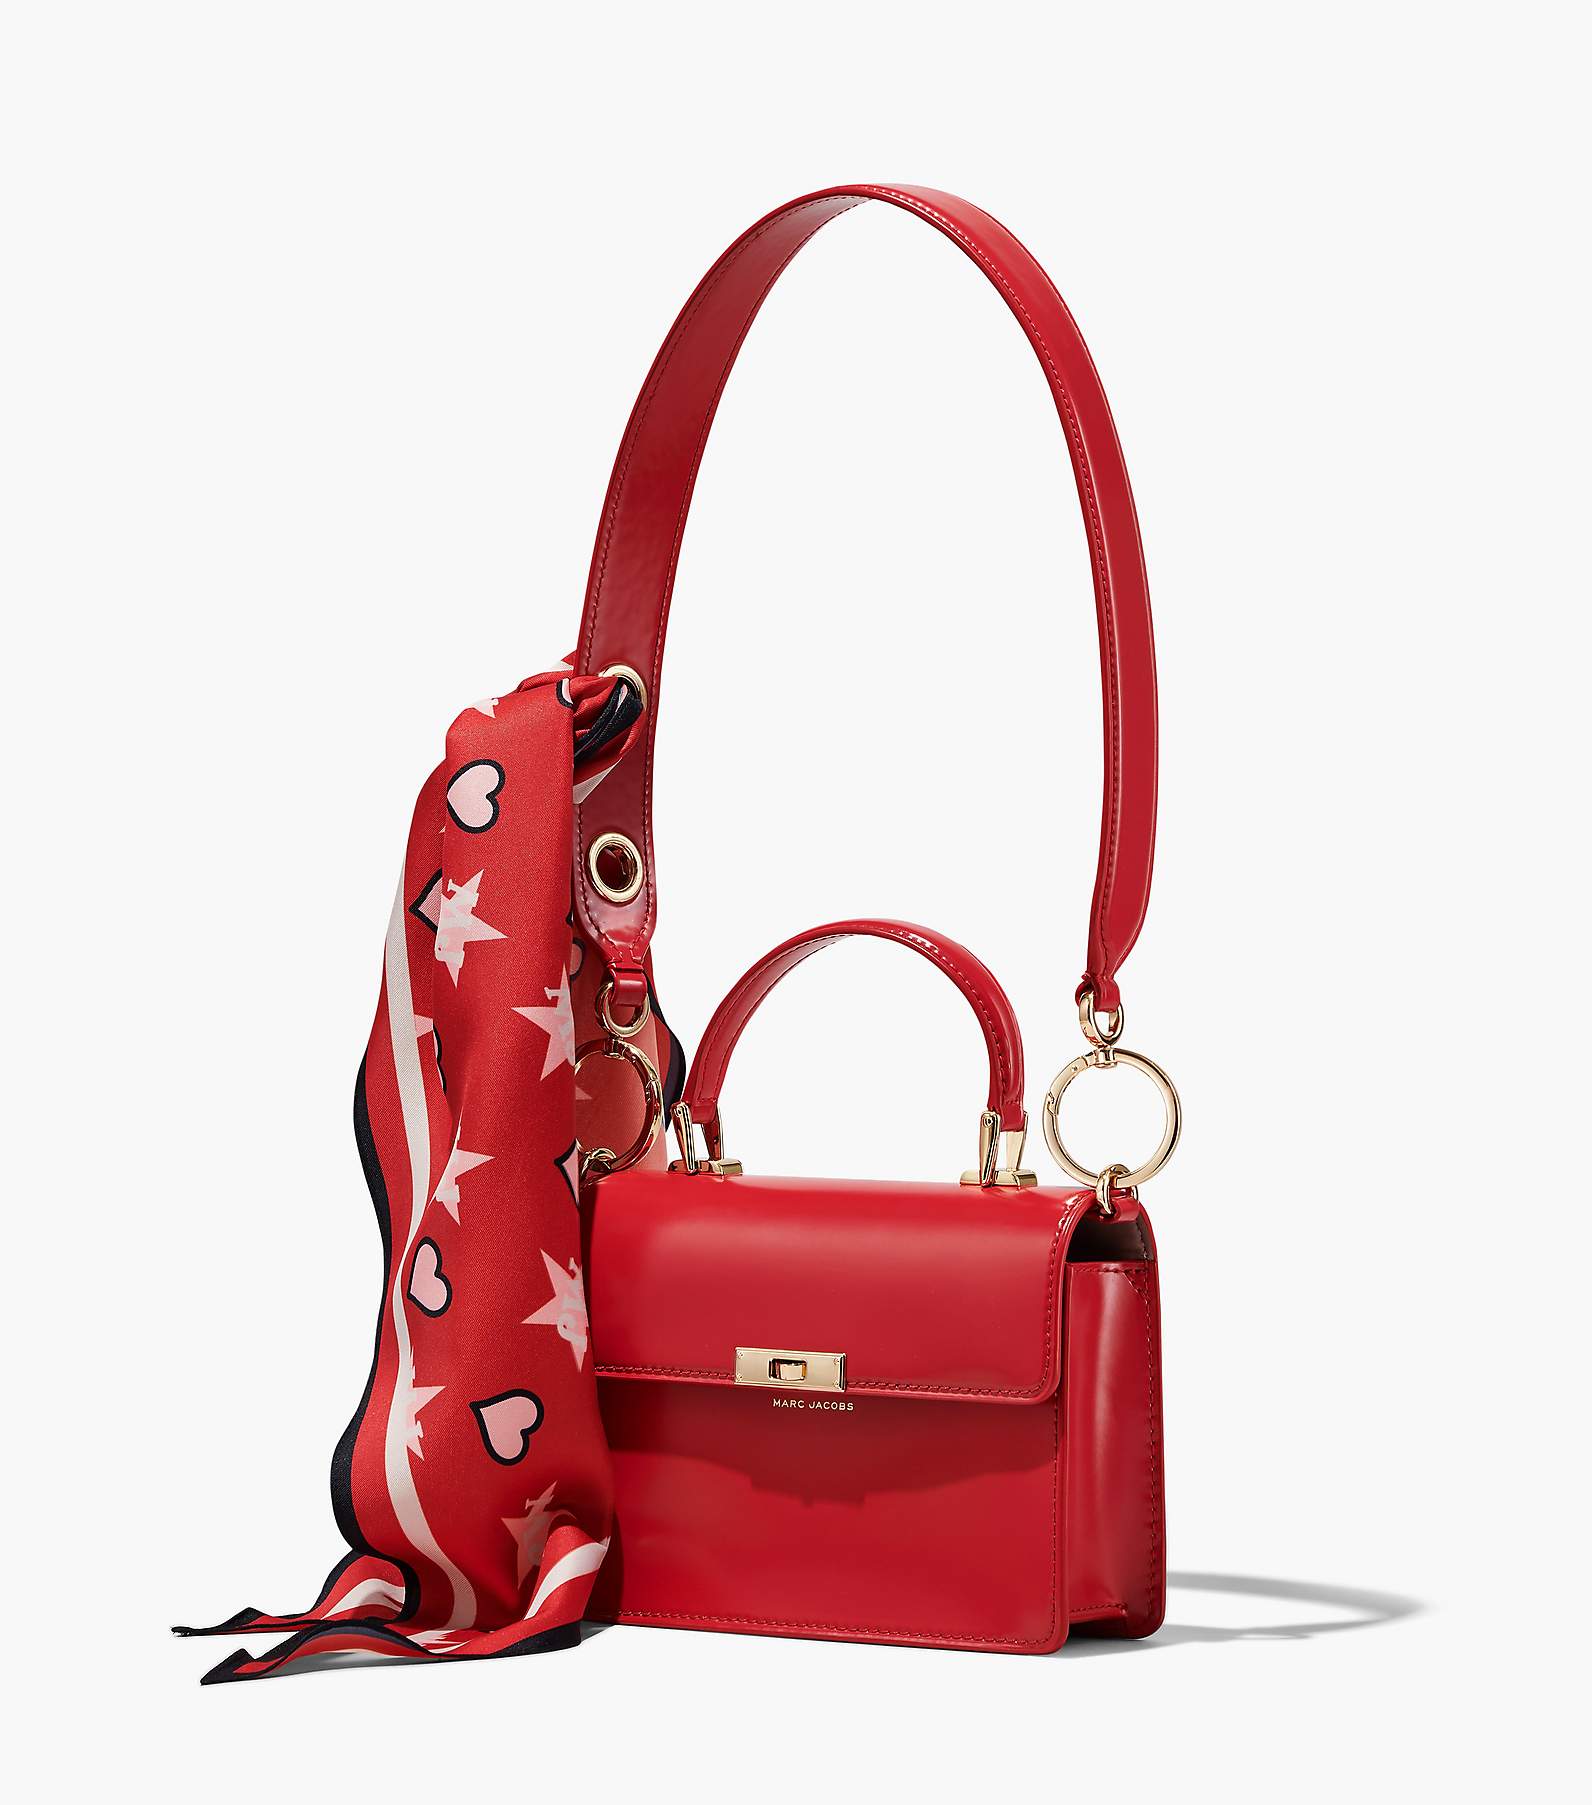 Marc Jacobs Launches Vintage Handbags From Archive